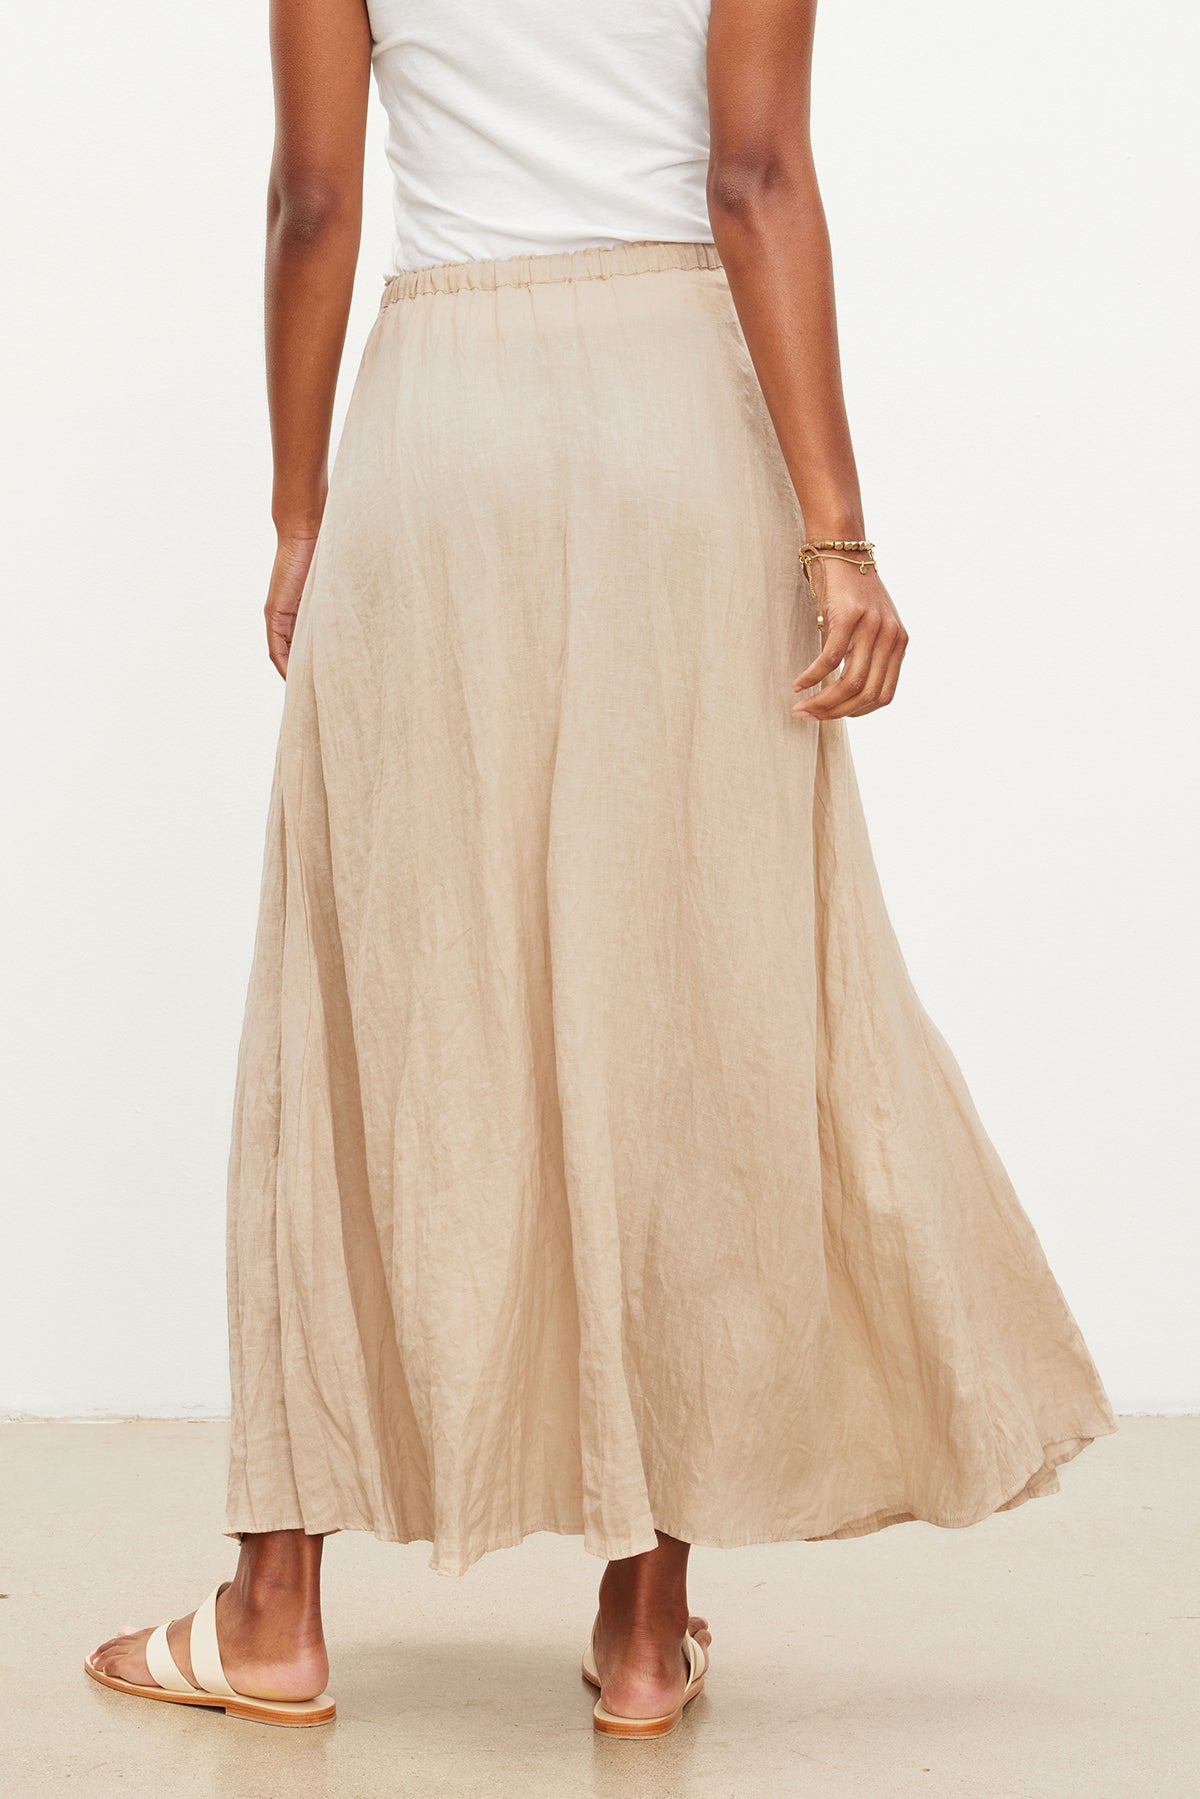 The back view of a woman wearing a Velvet by Graham & Spencer BAILEY LINEN MAXI SKIRT.-35955424166081